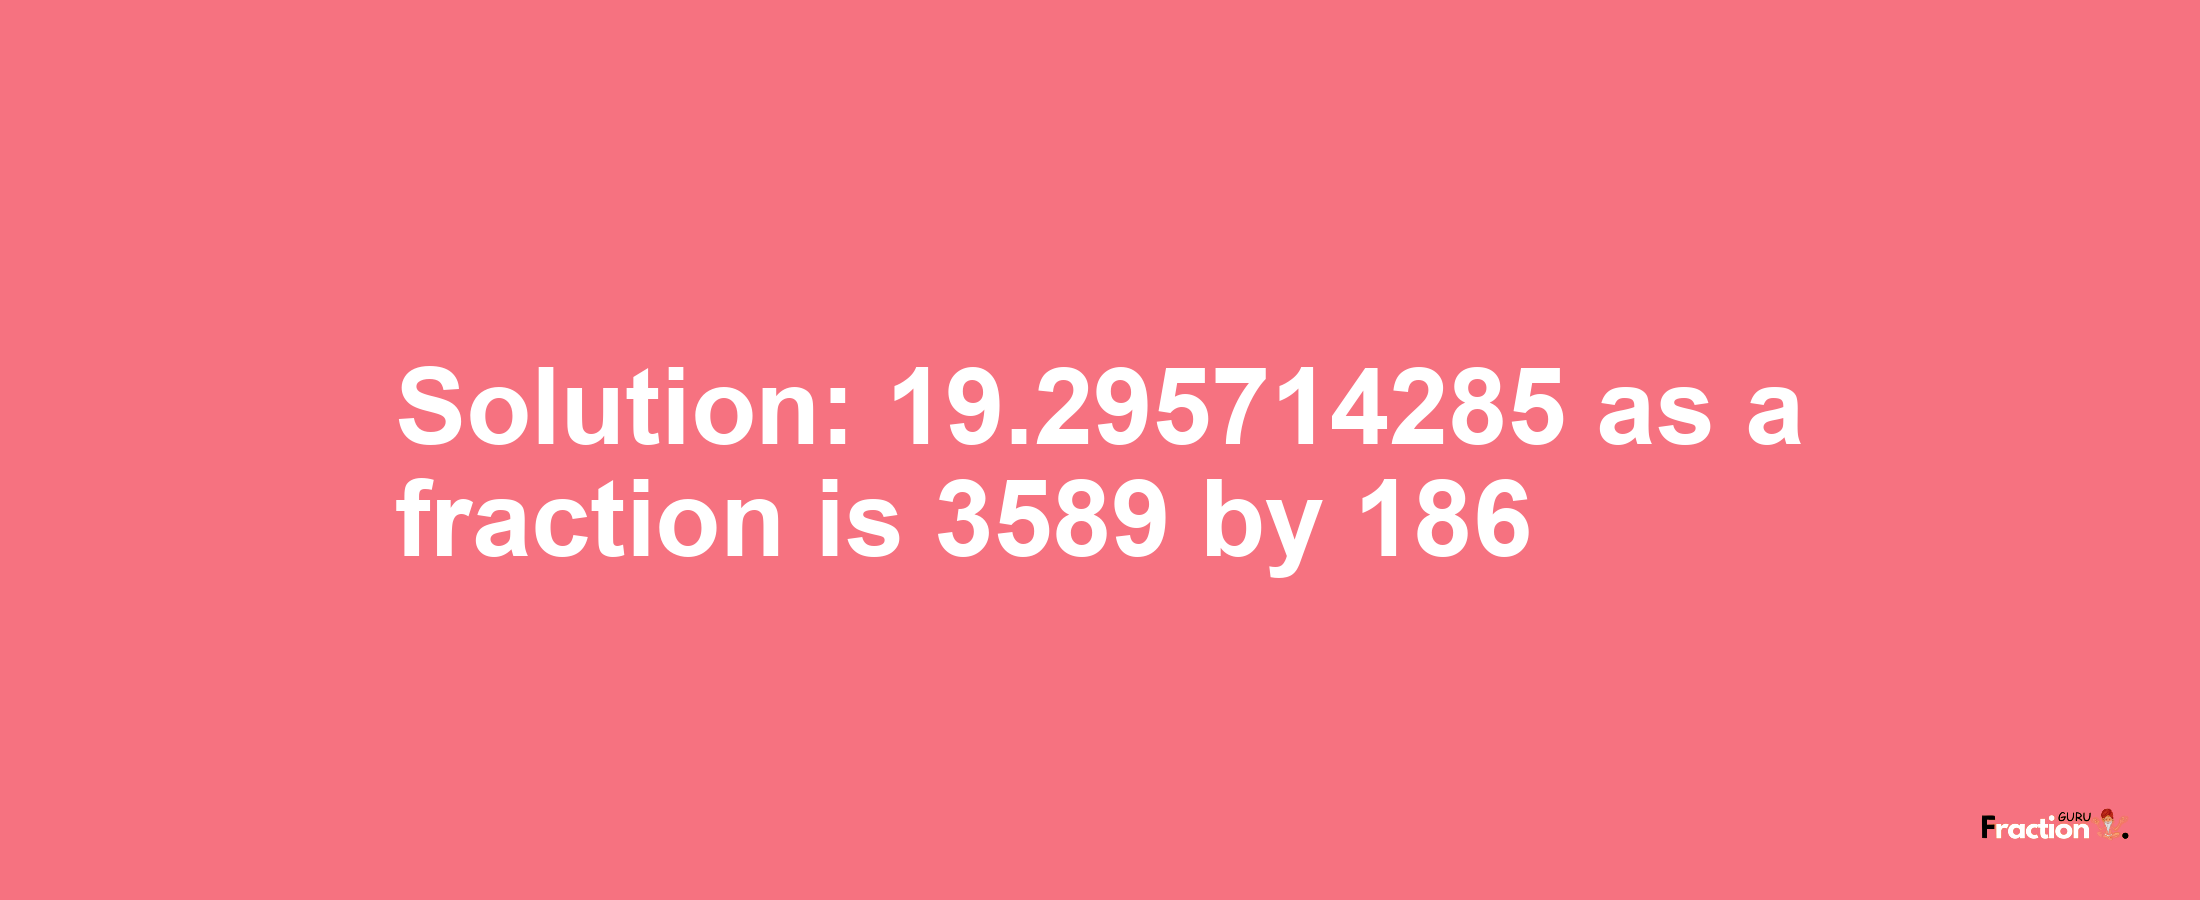 Solution:19.295714285 as a fraction is 3589/186